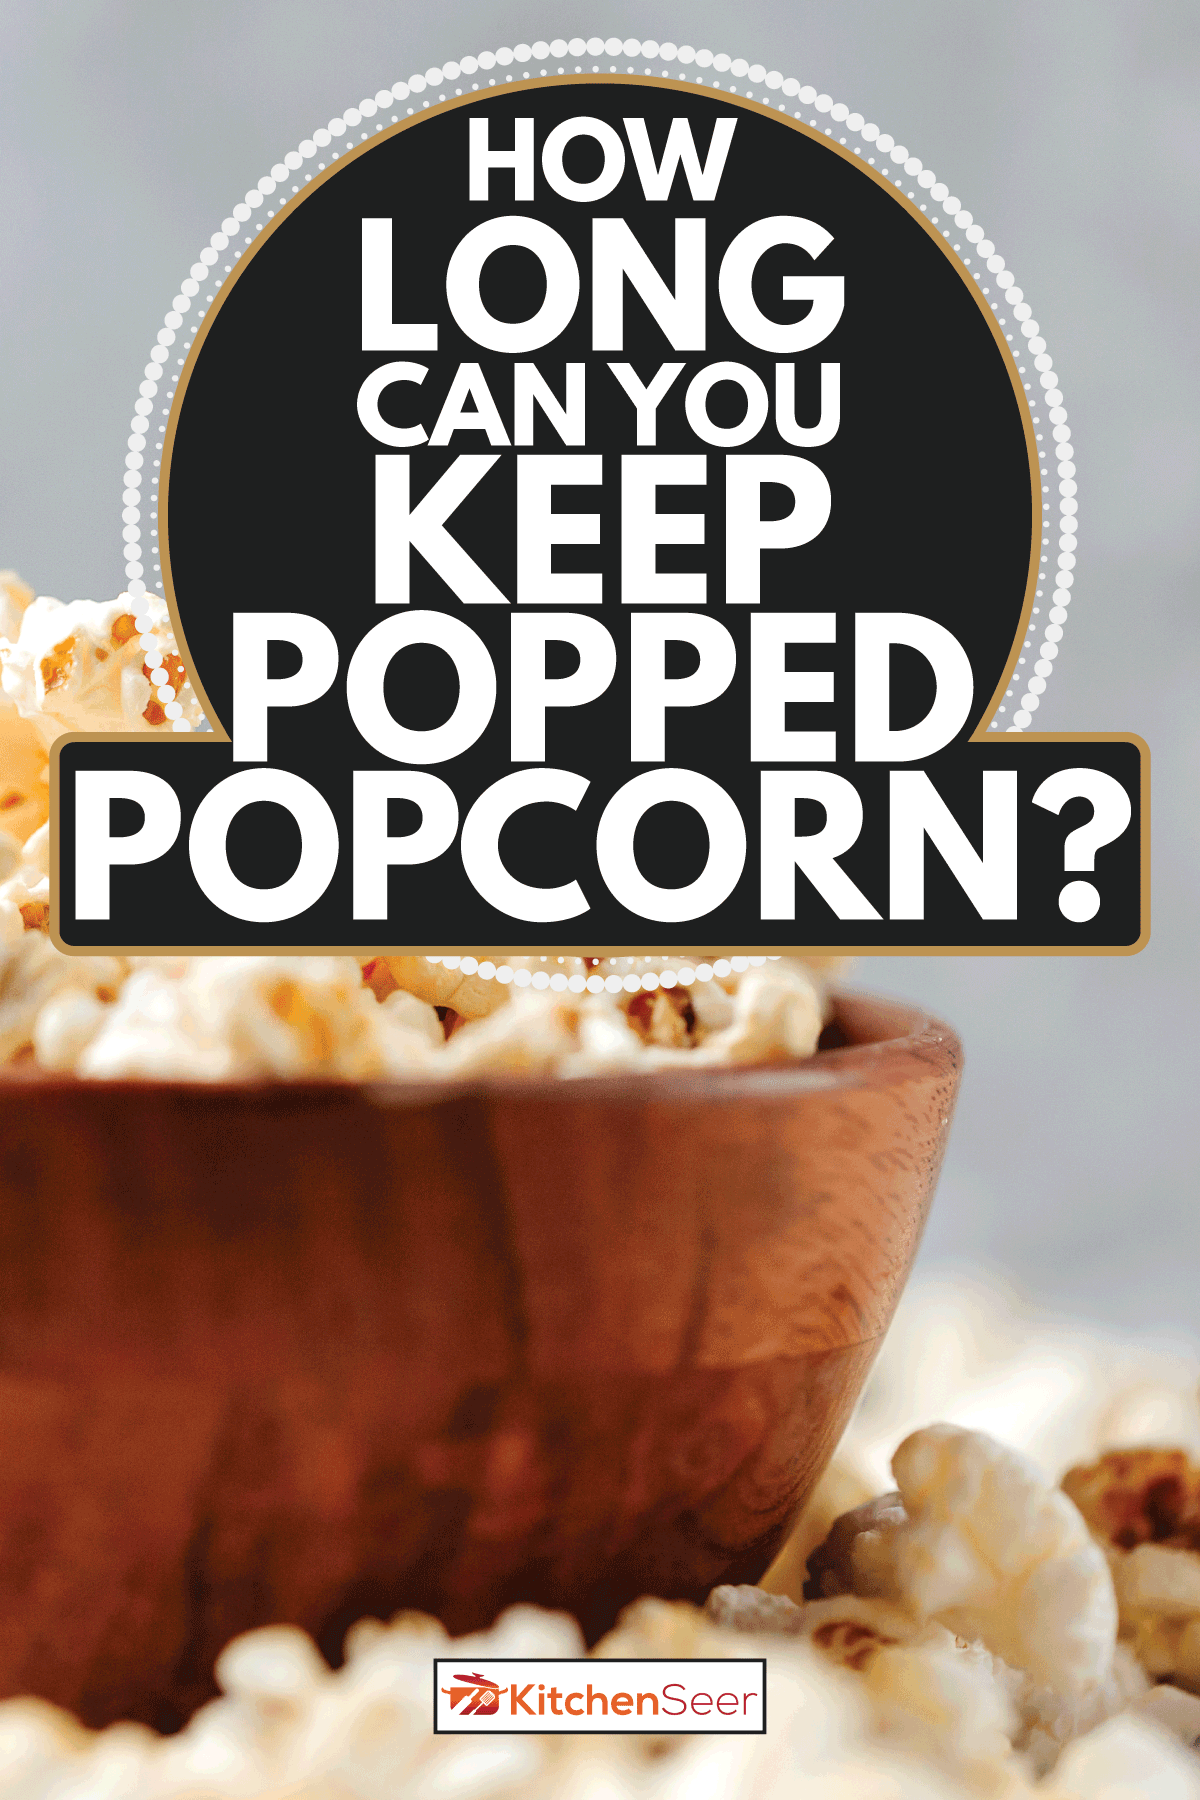 A wooden bowl of salted popcorn on rustic grey table. How Long Can You Keep Popped Popcorn